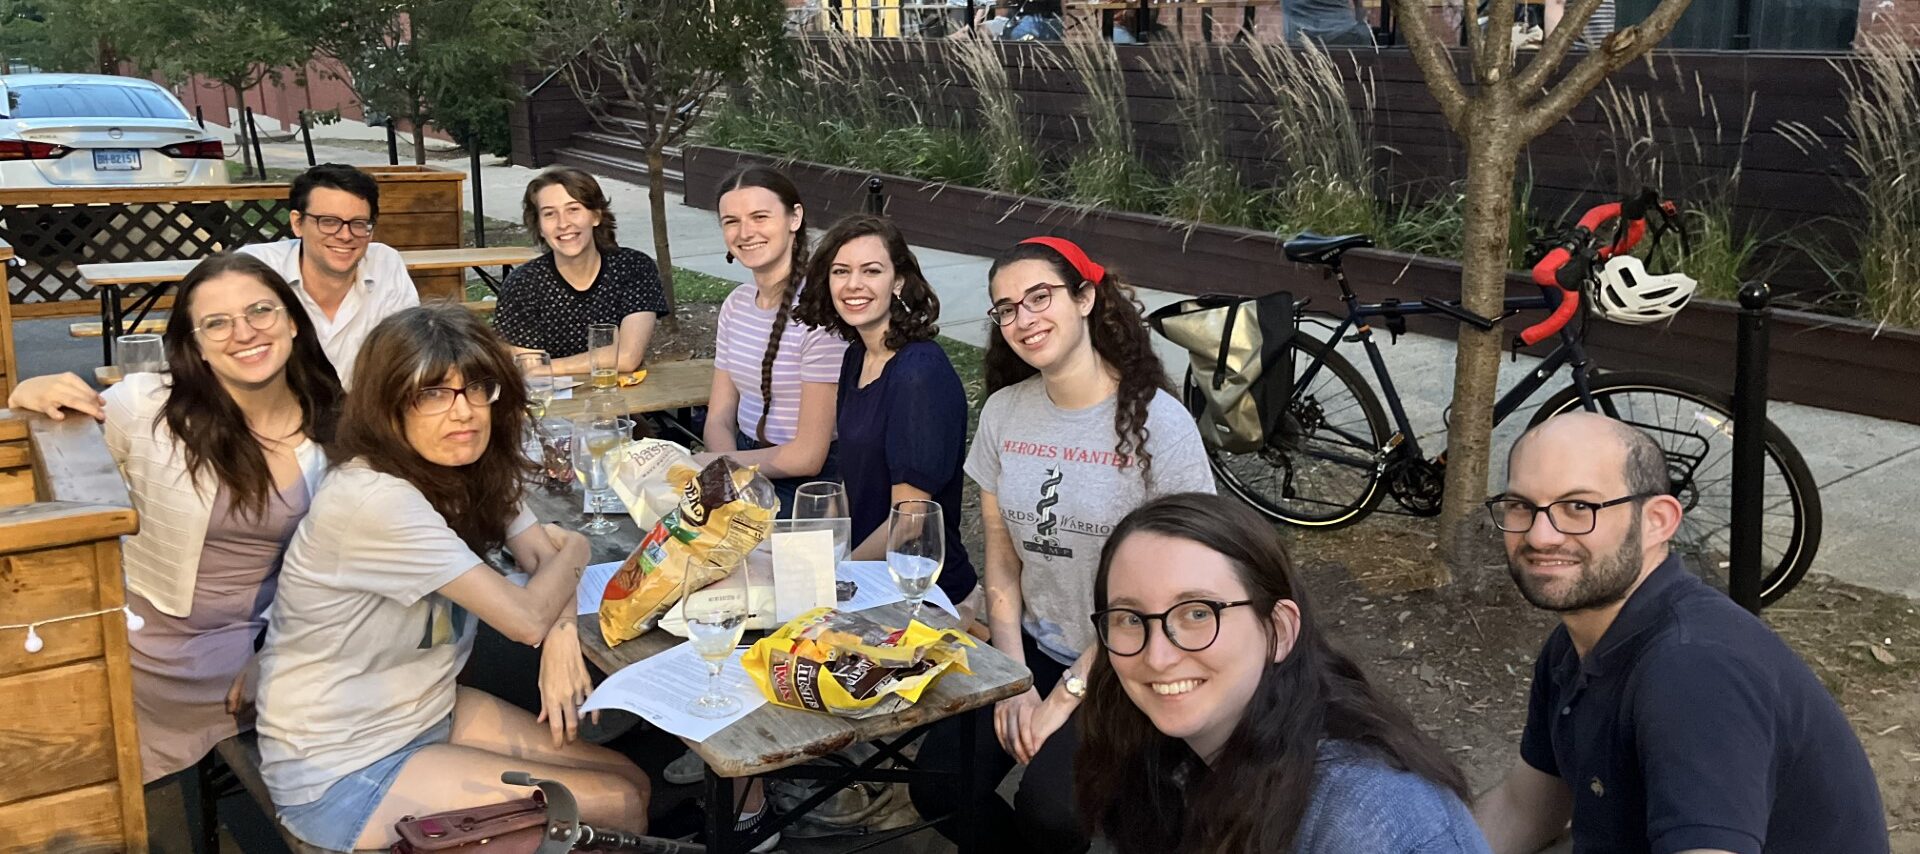 People sit around a table outside, smiling at the camera. On the table are snacks and beers.